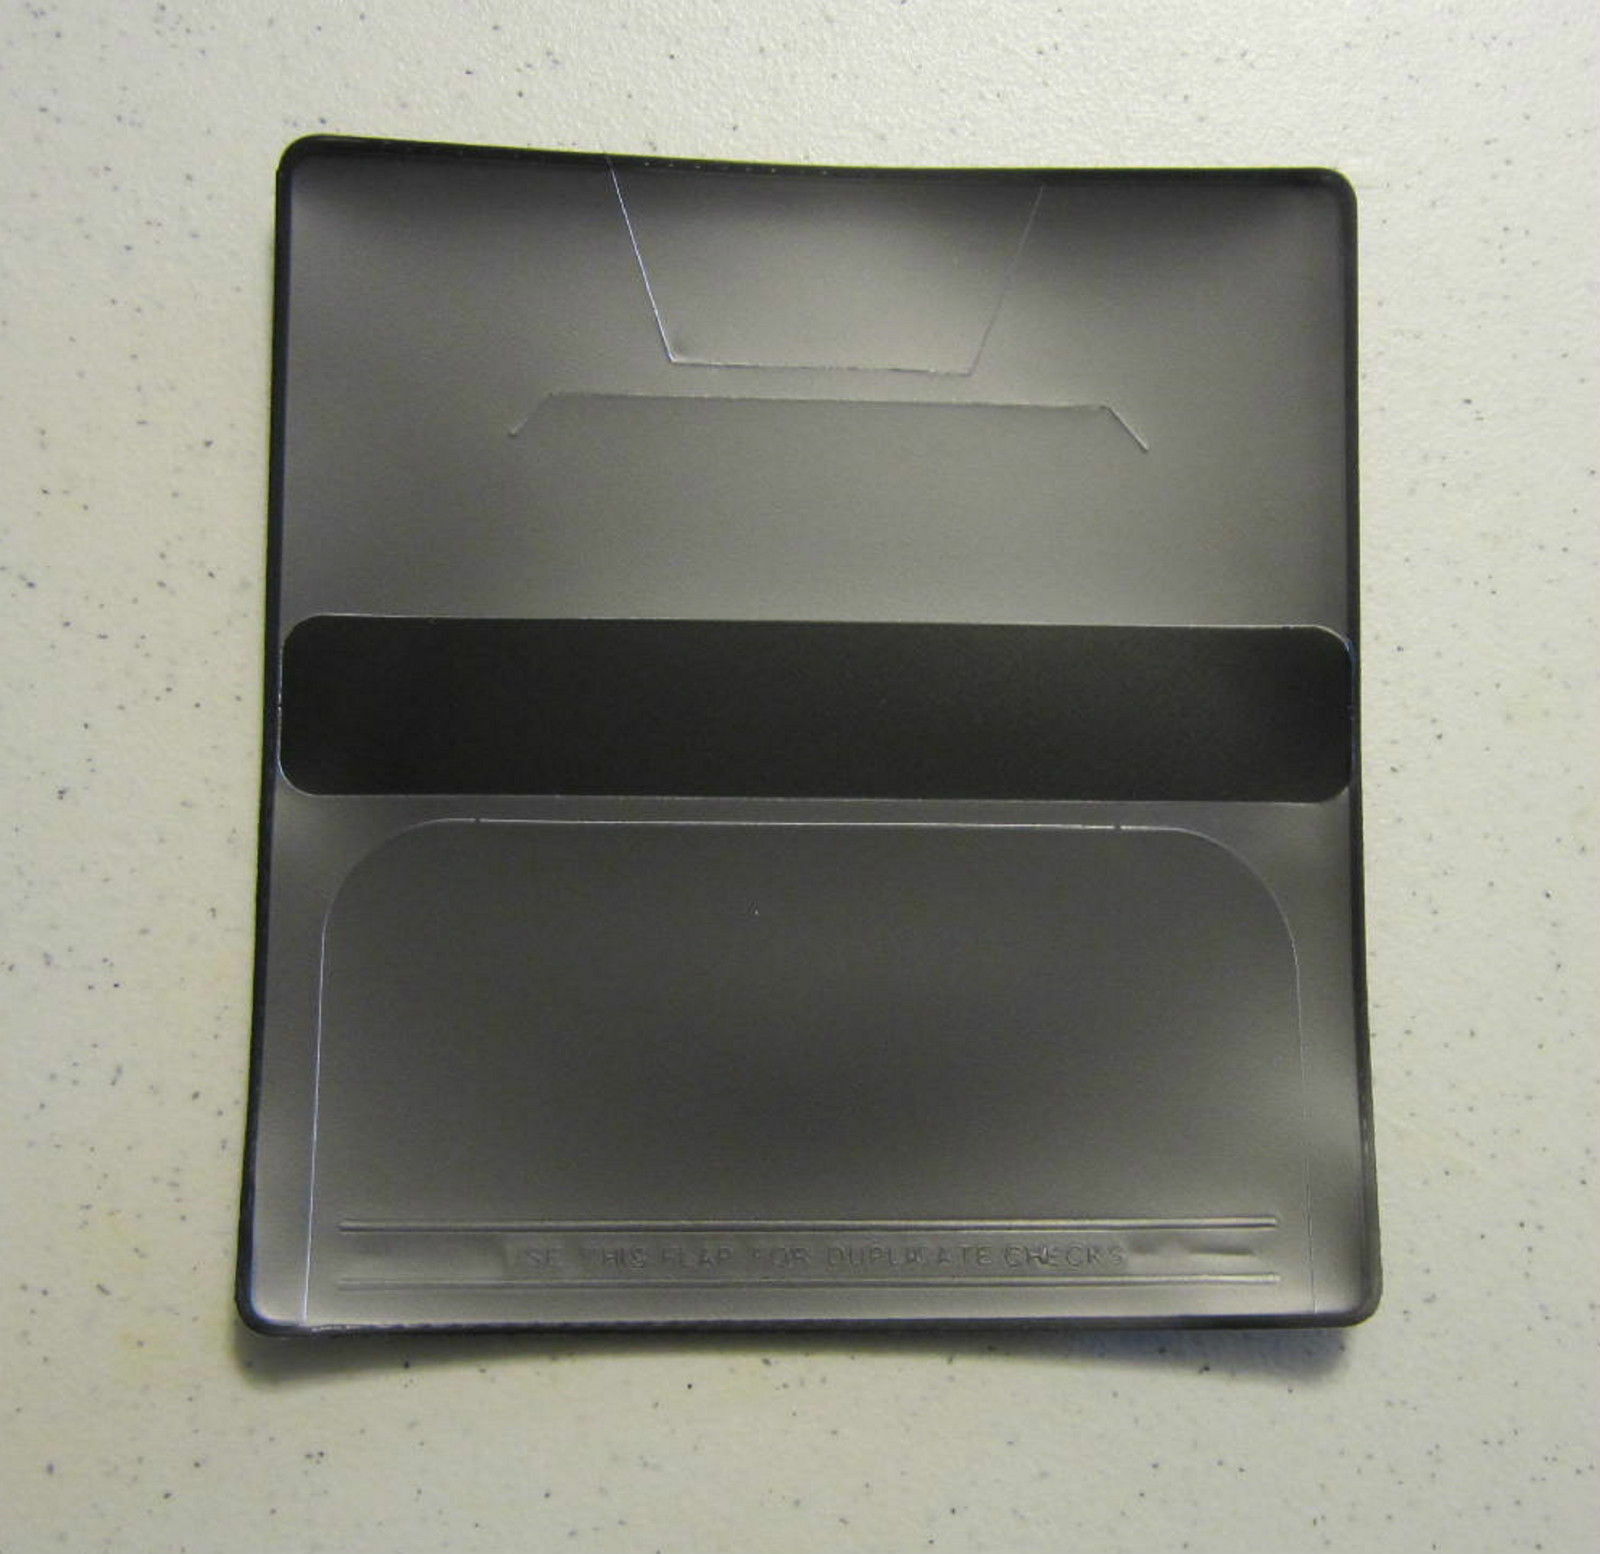 1 New Black Vinyl Checkbook Cover With Duplicate Flap